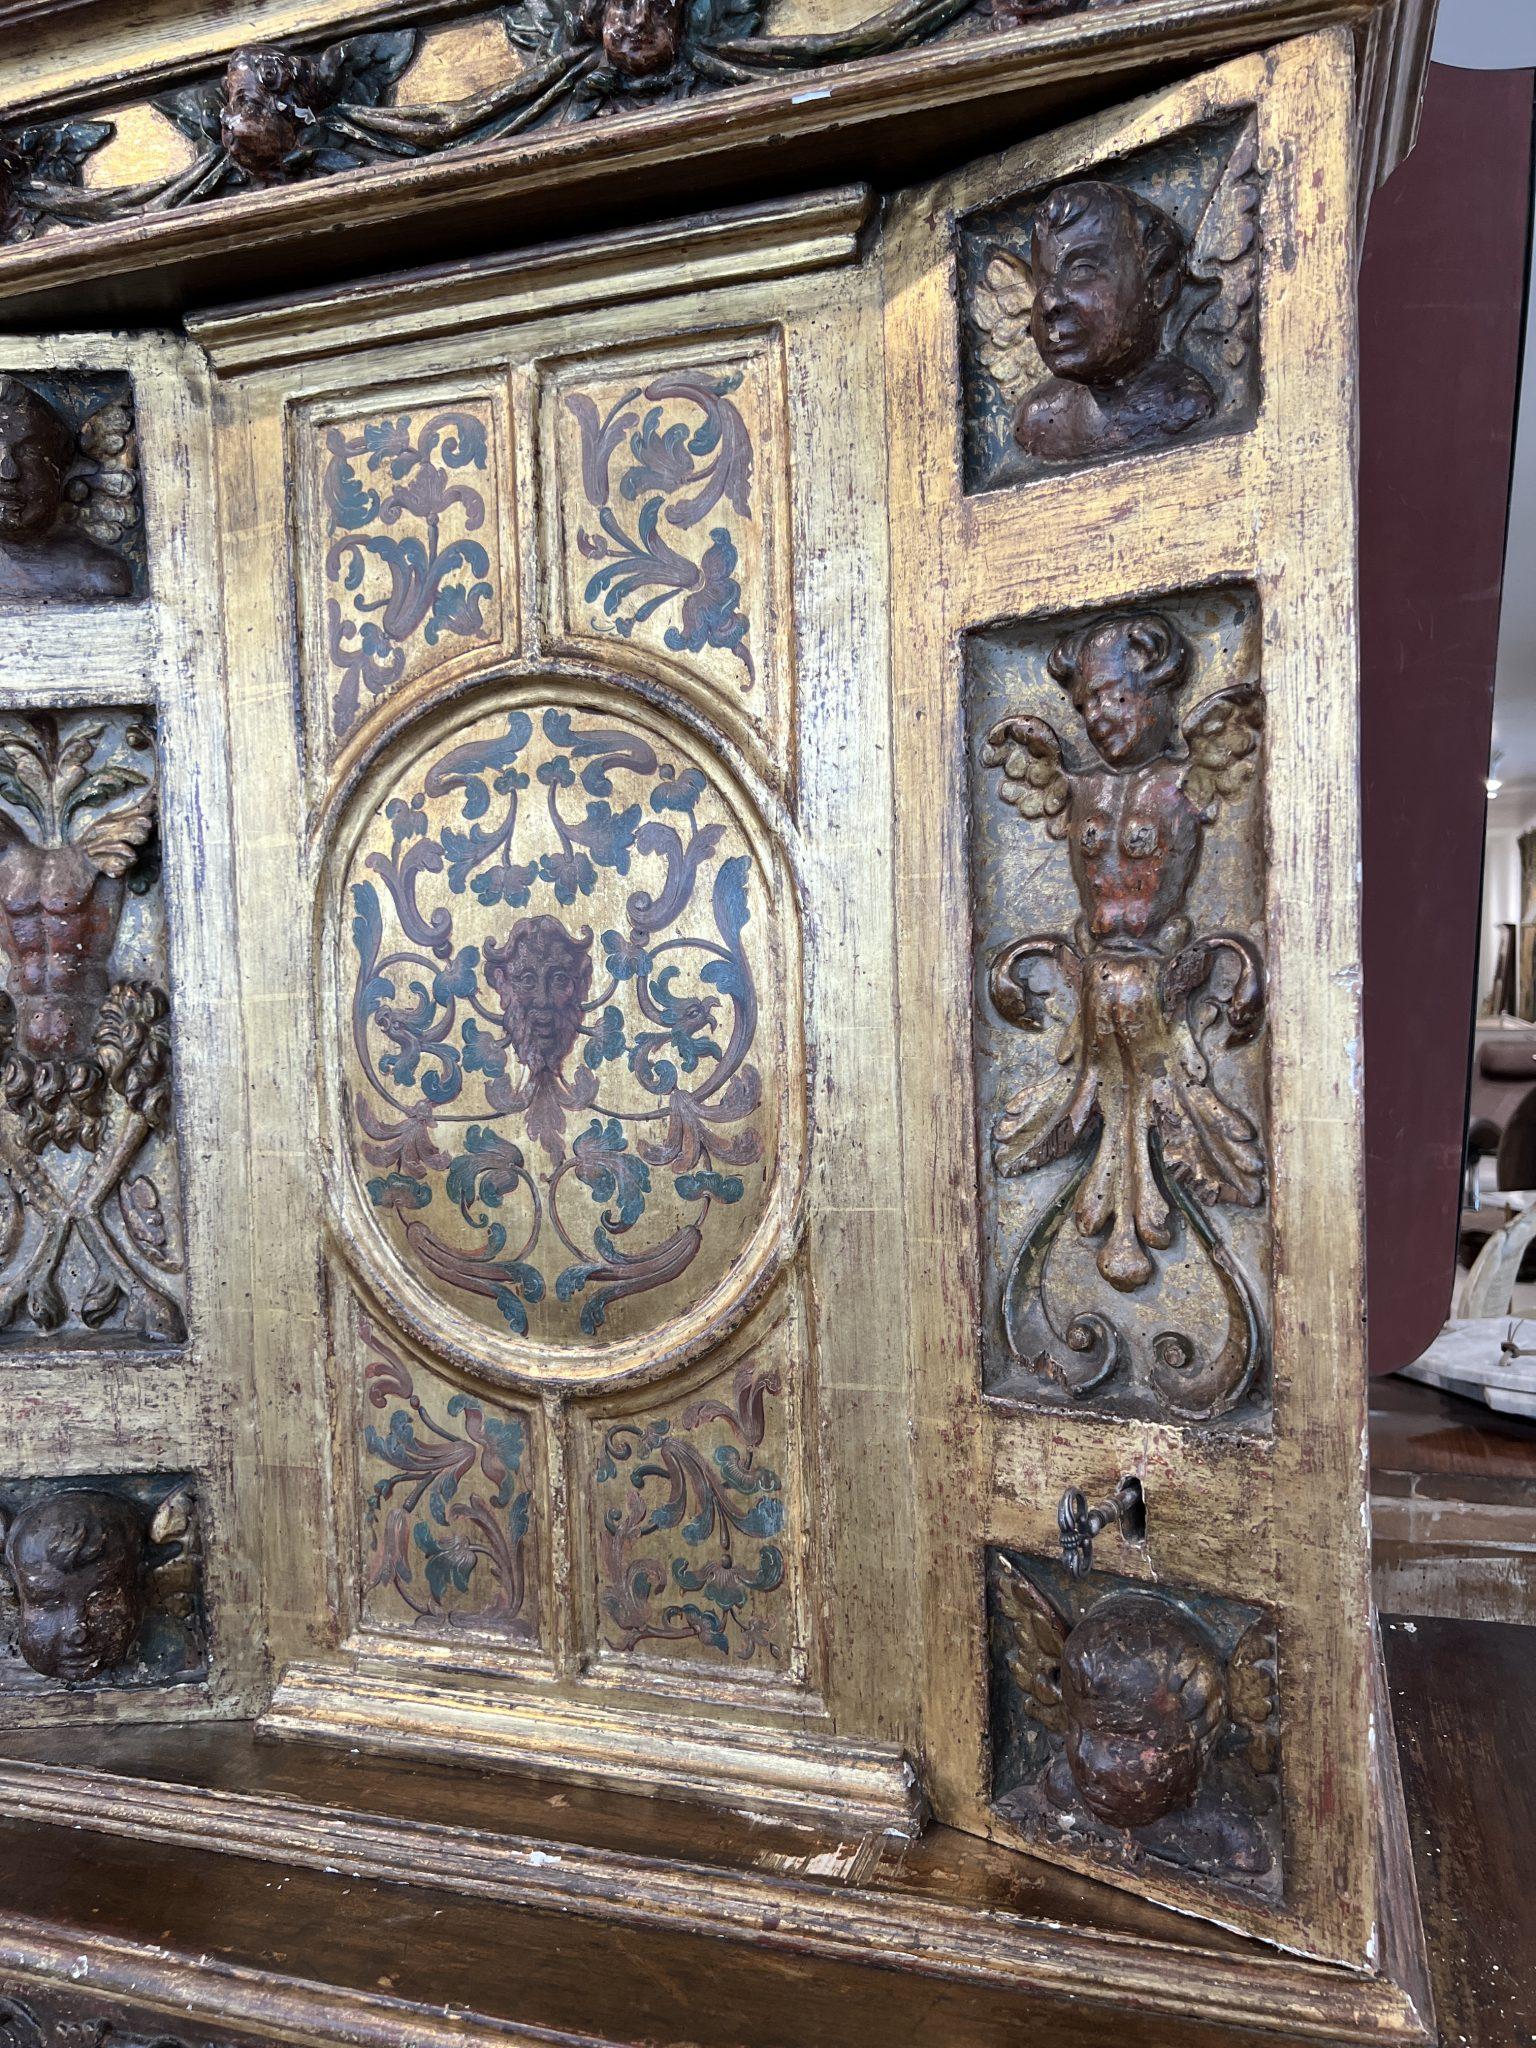 The wow factor is enormous with the extremely ornate carving and painting galore over every surface. Adorned with cherubs and mythical creatures, this cabinet would be the hero in any room.